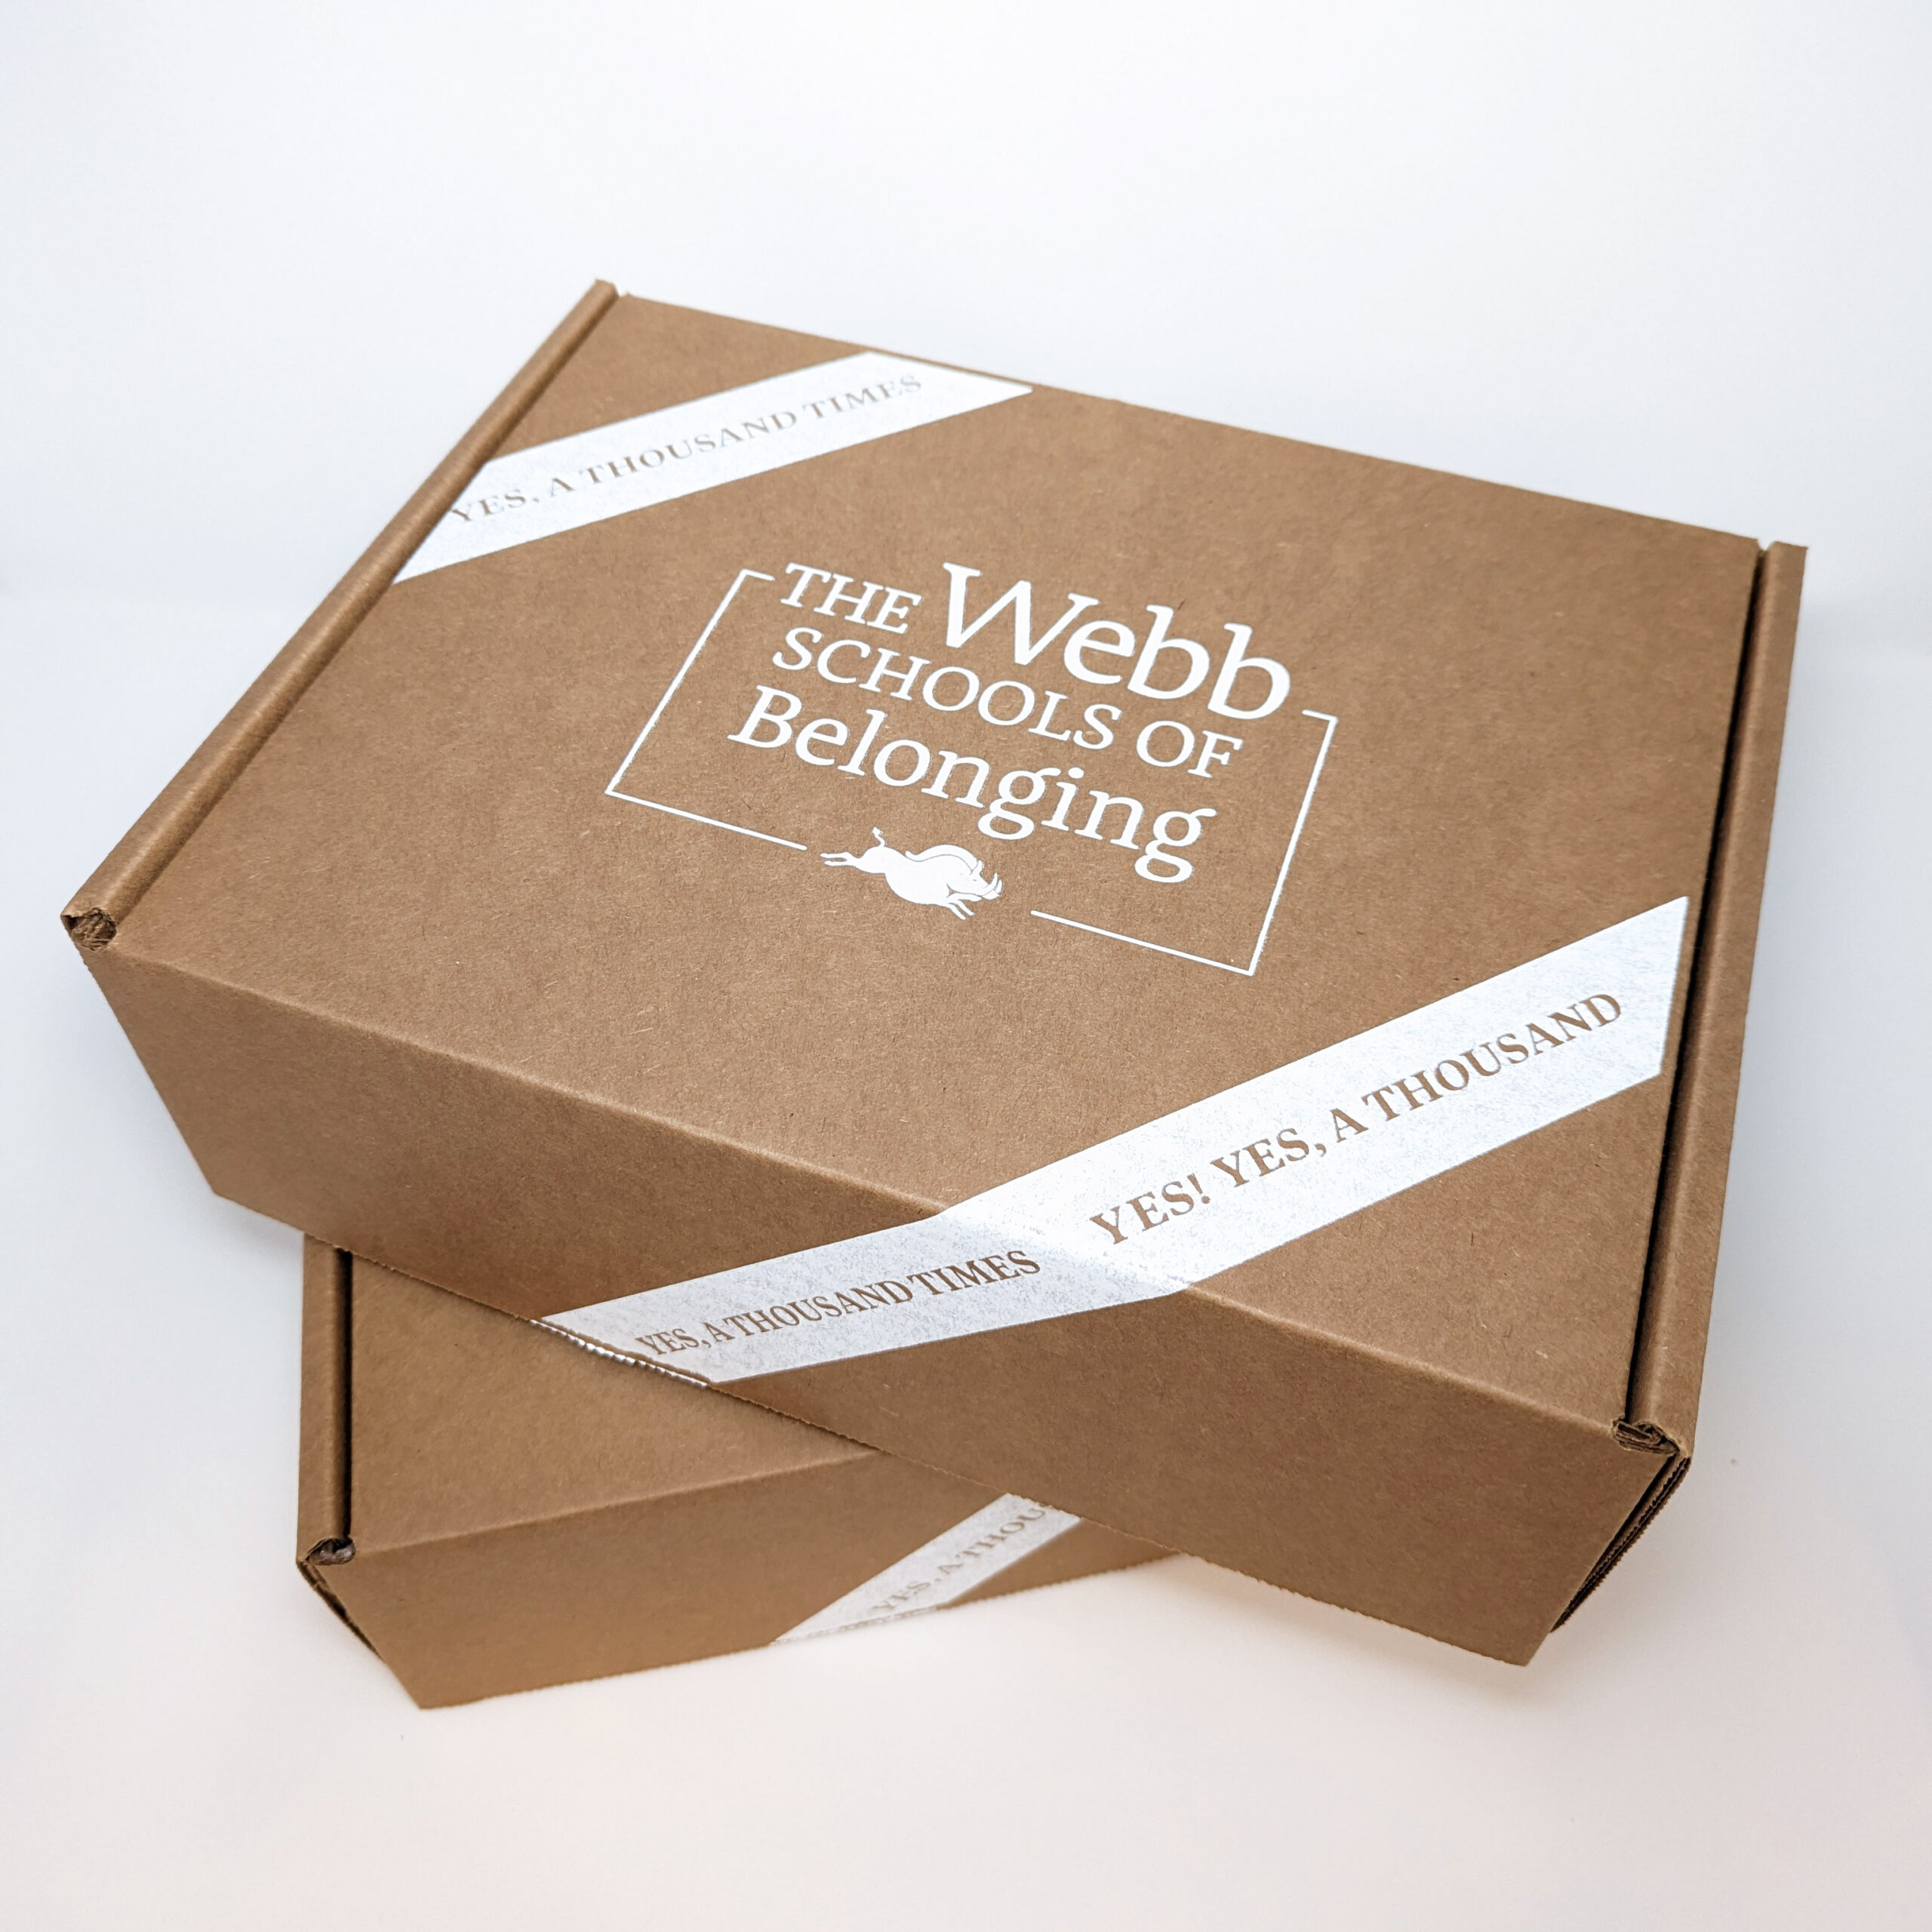 The Webb Schools admissions package designed by Kilter